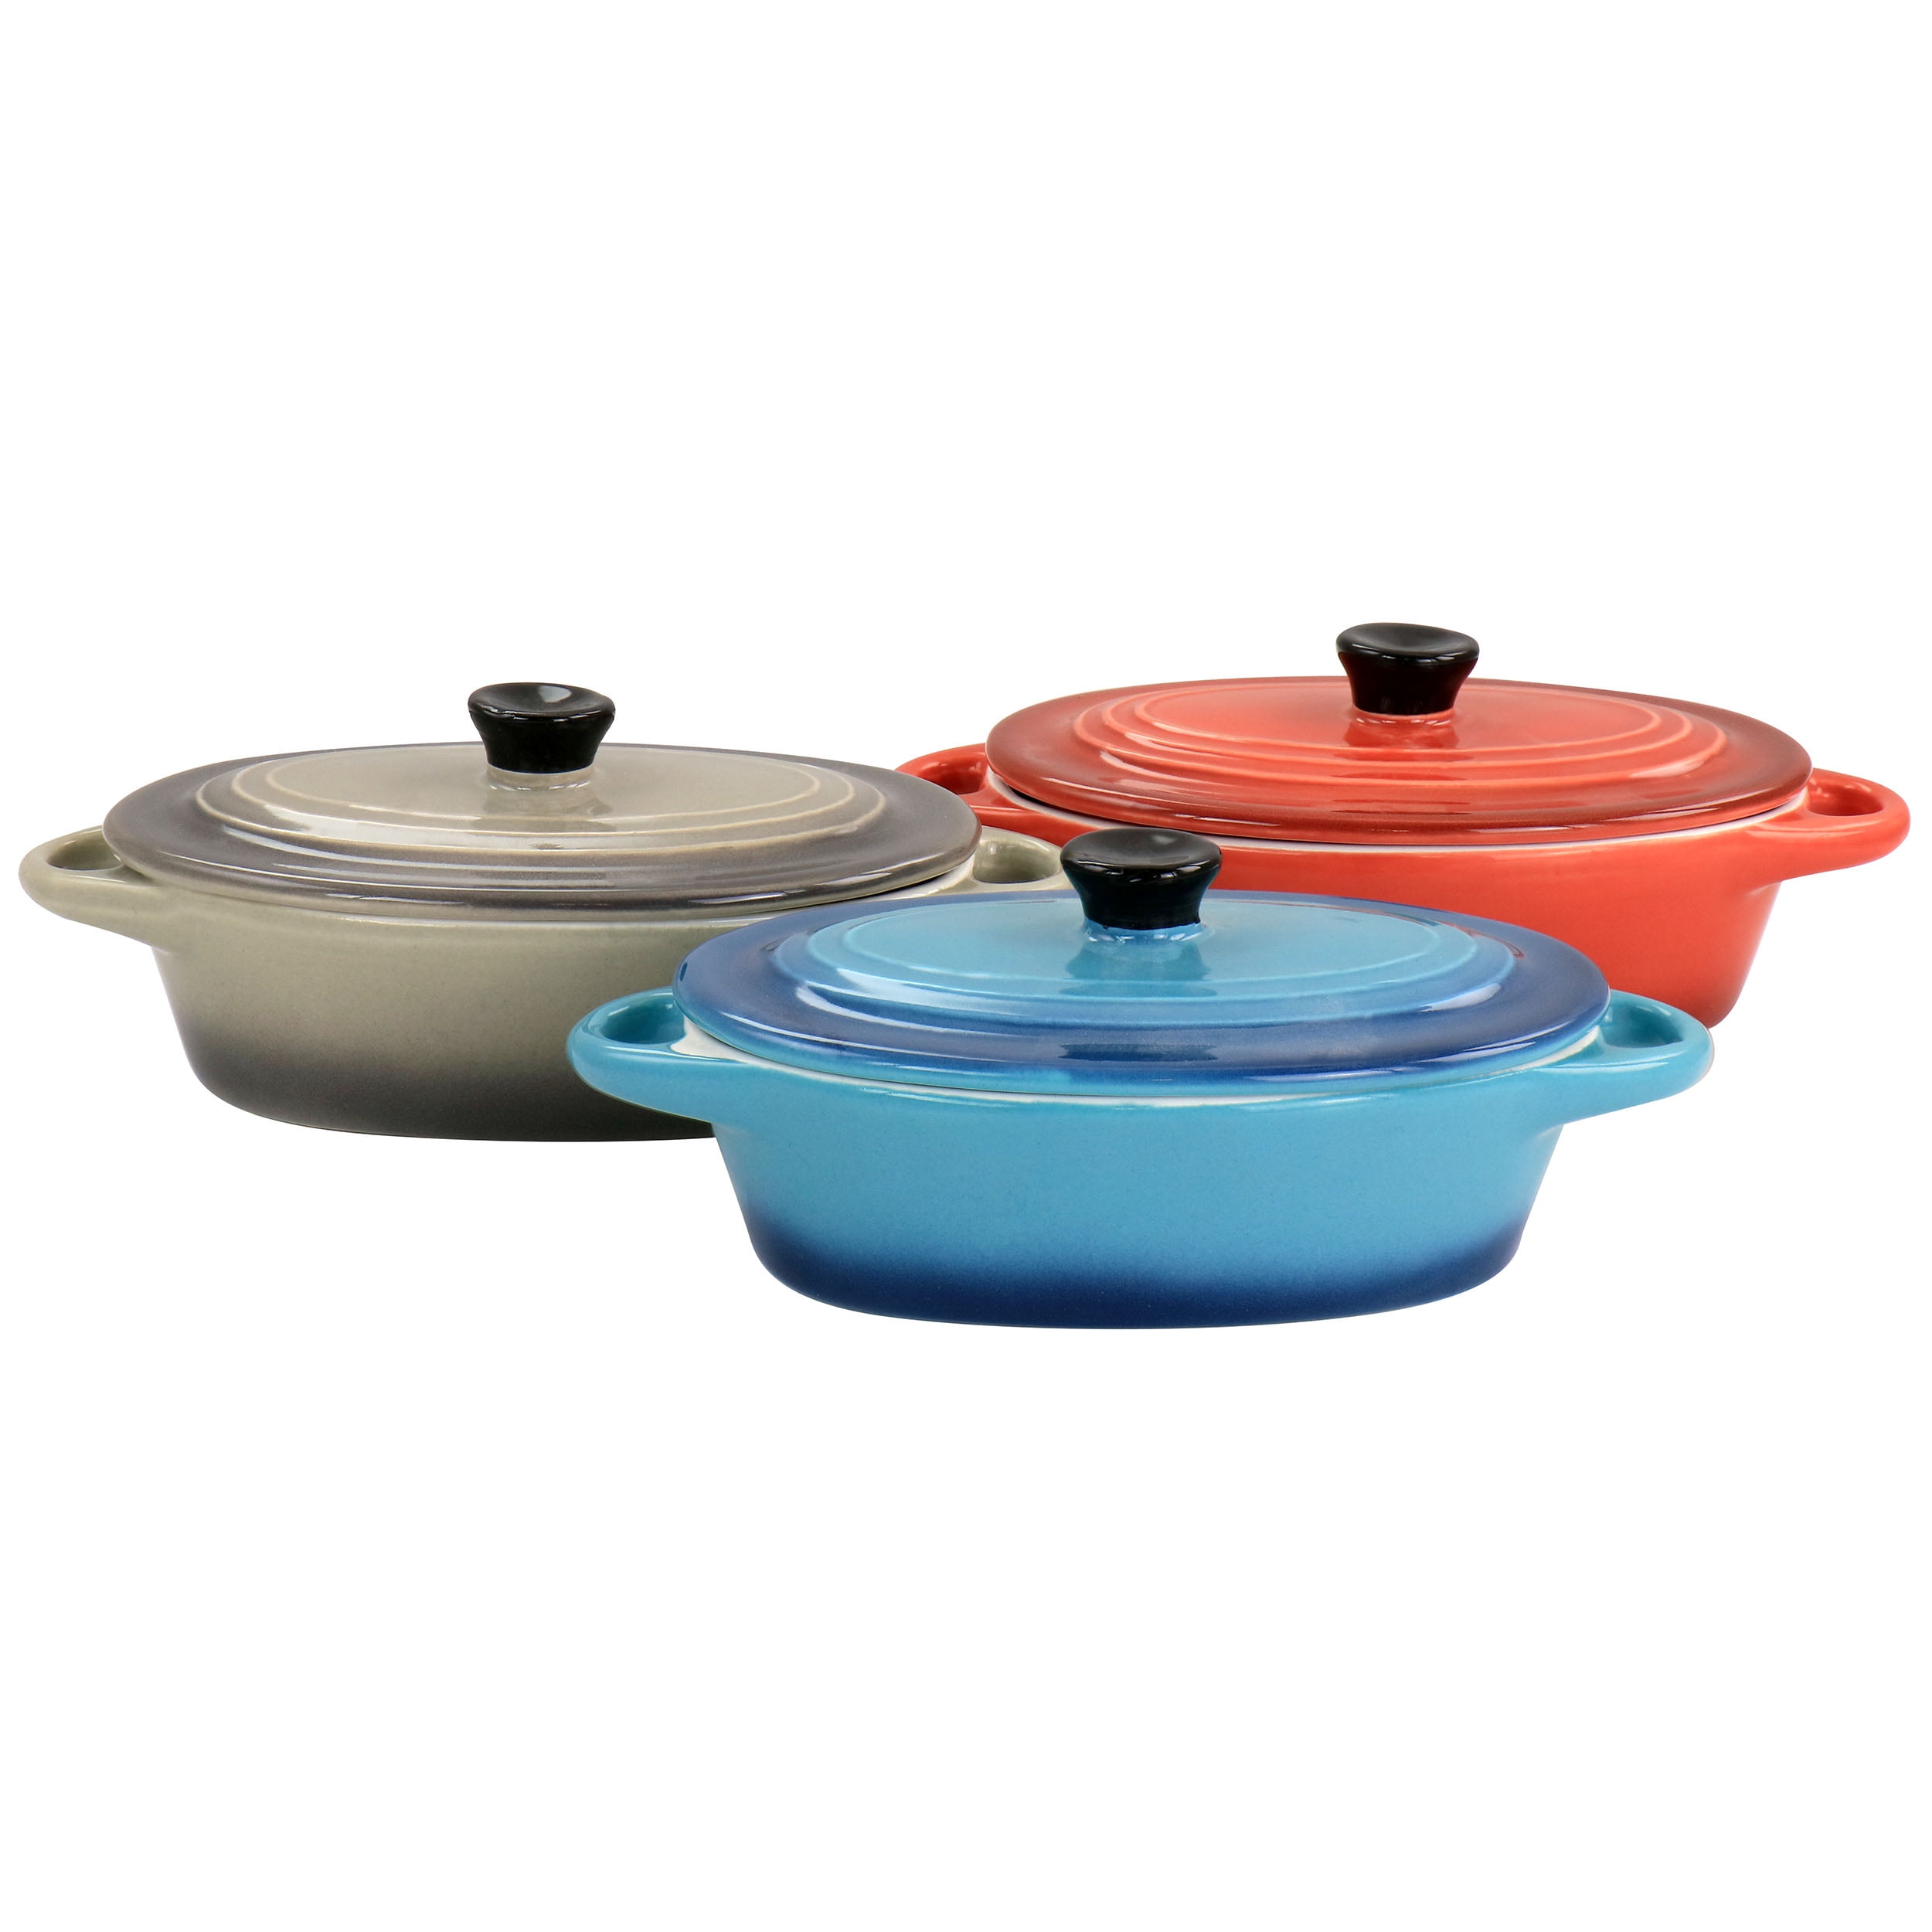 Crock Pot Marti 8.5 Ribbed Casserole with Lid in Red - 9160701